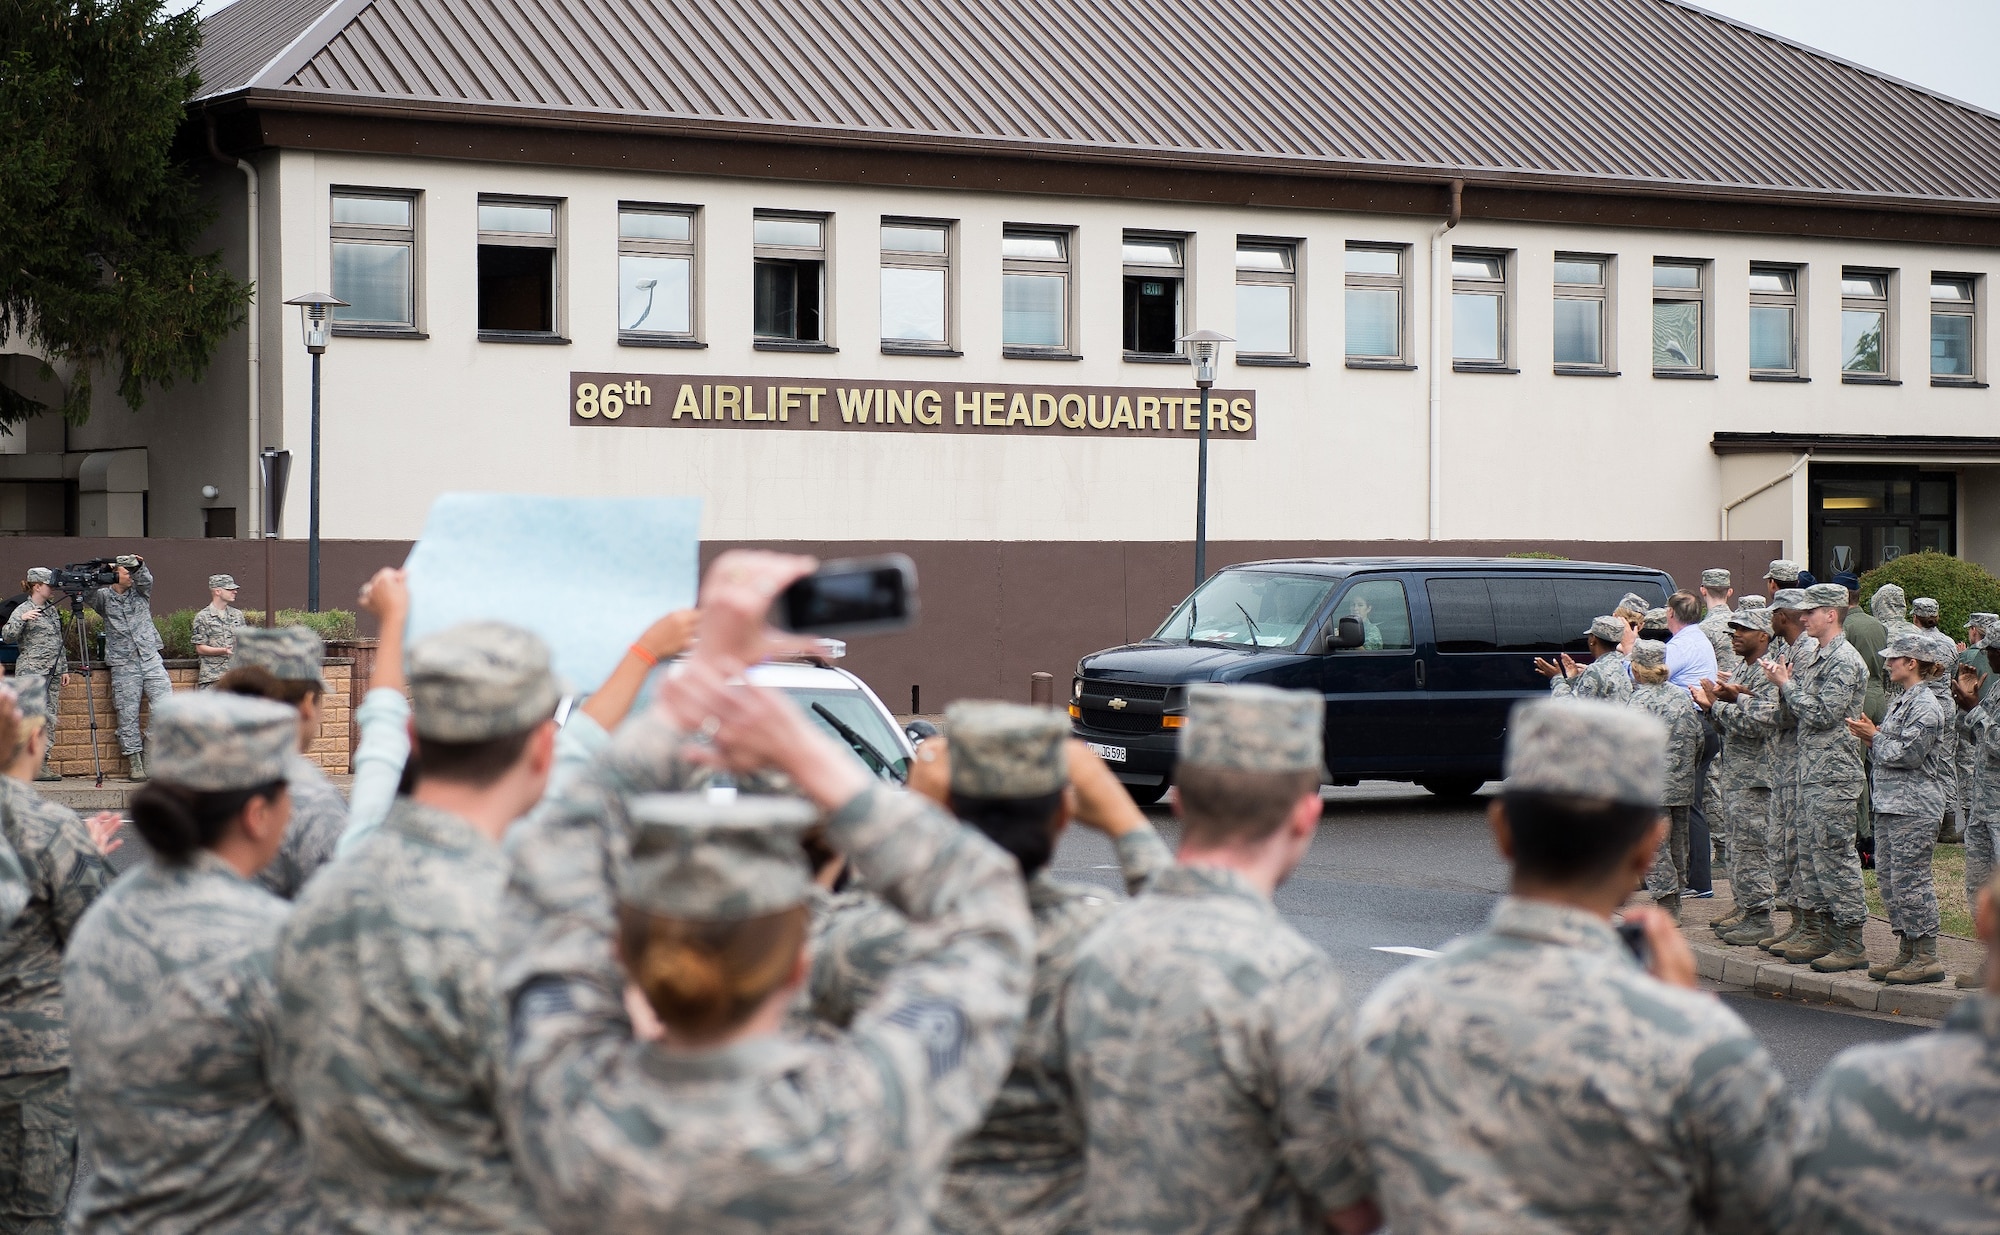 More than 500 service members and civilians line the streets of Ramstein Air Base, Germany, Aug. 24, 2015, to applaud Airman 1st Class Spencer Stone and Aleksander Skarlatos, an Army specialist in the Oregon National Guard, for their recent heroic actions in France. Stone is an ambulance service technician with the 65th Medical Operations Squadron at Lajes Field, Azores. (U.S. Air Force photo/Senior Airman Damon Kasberg)